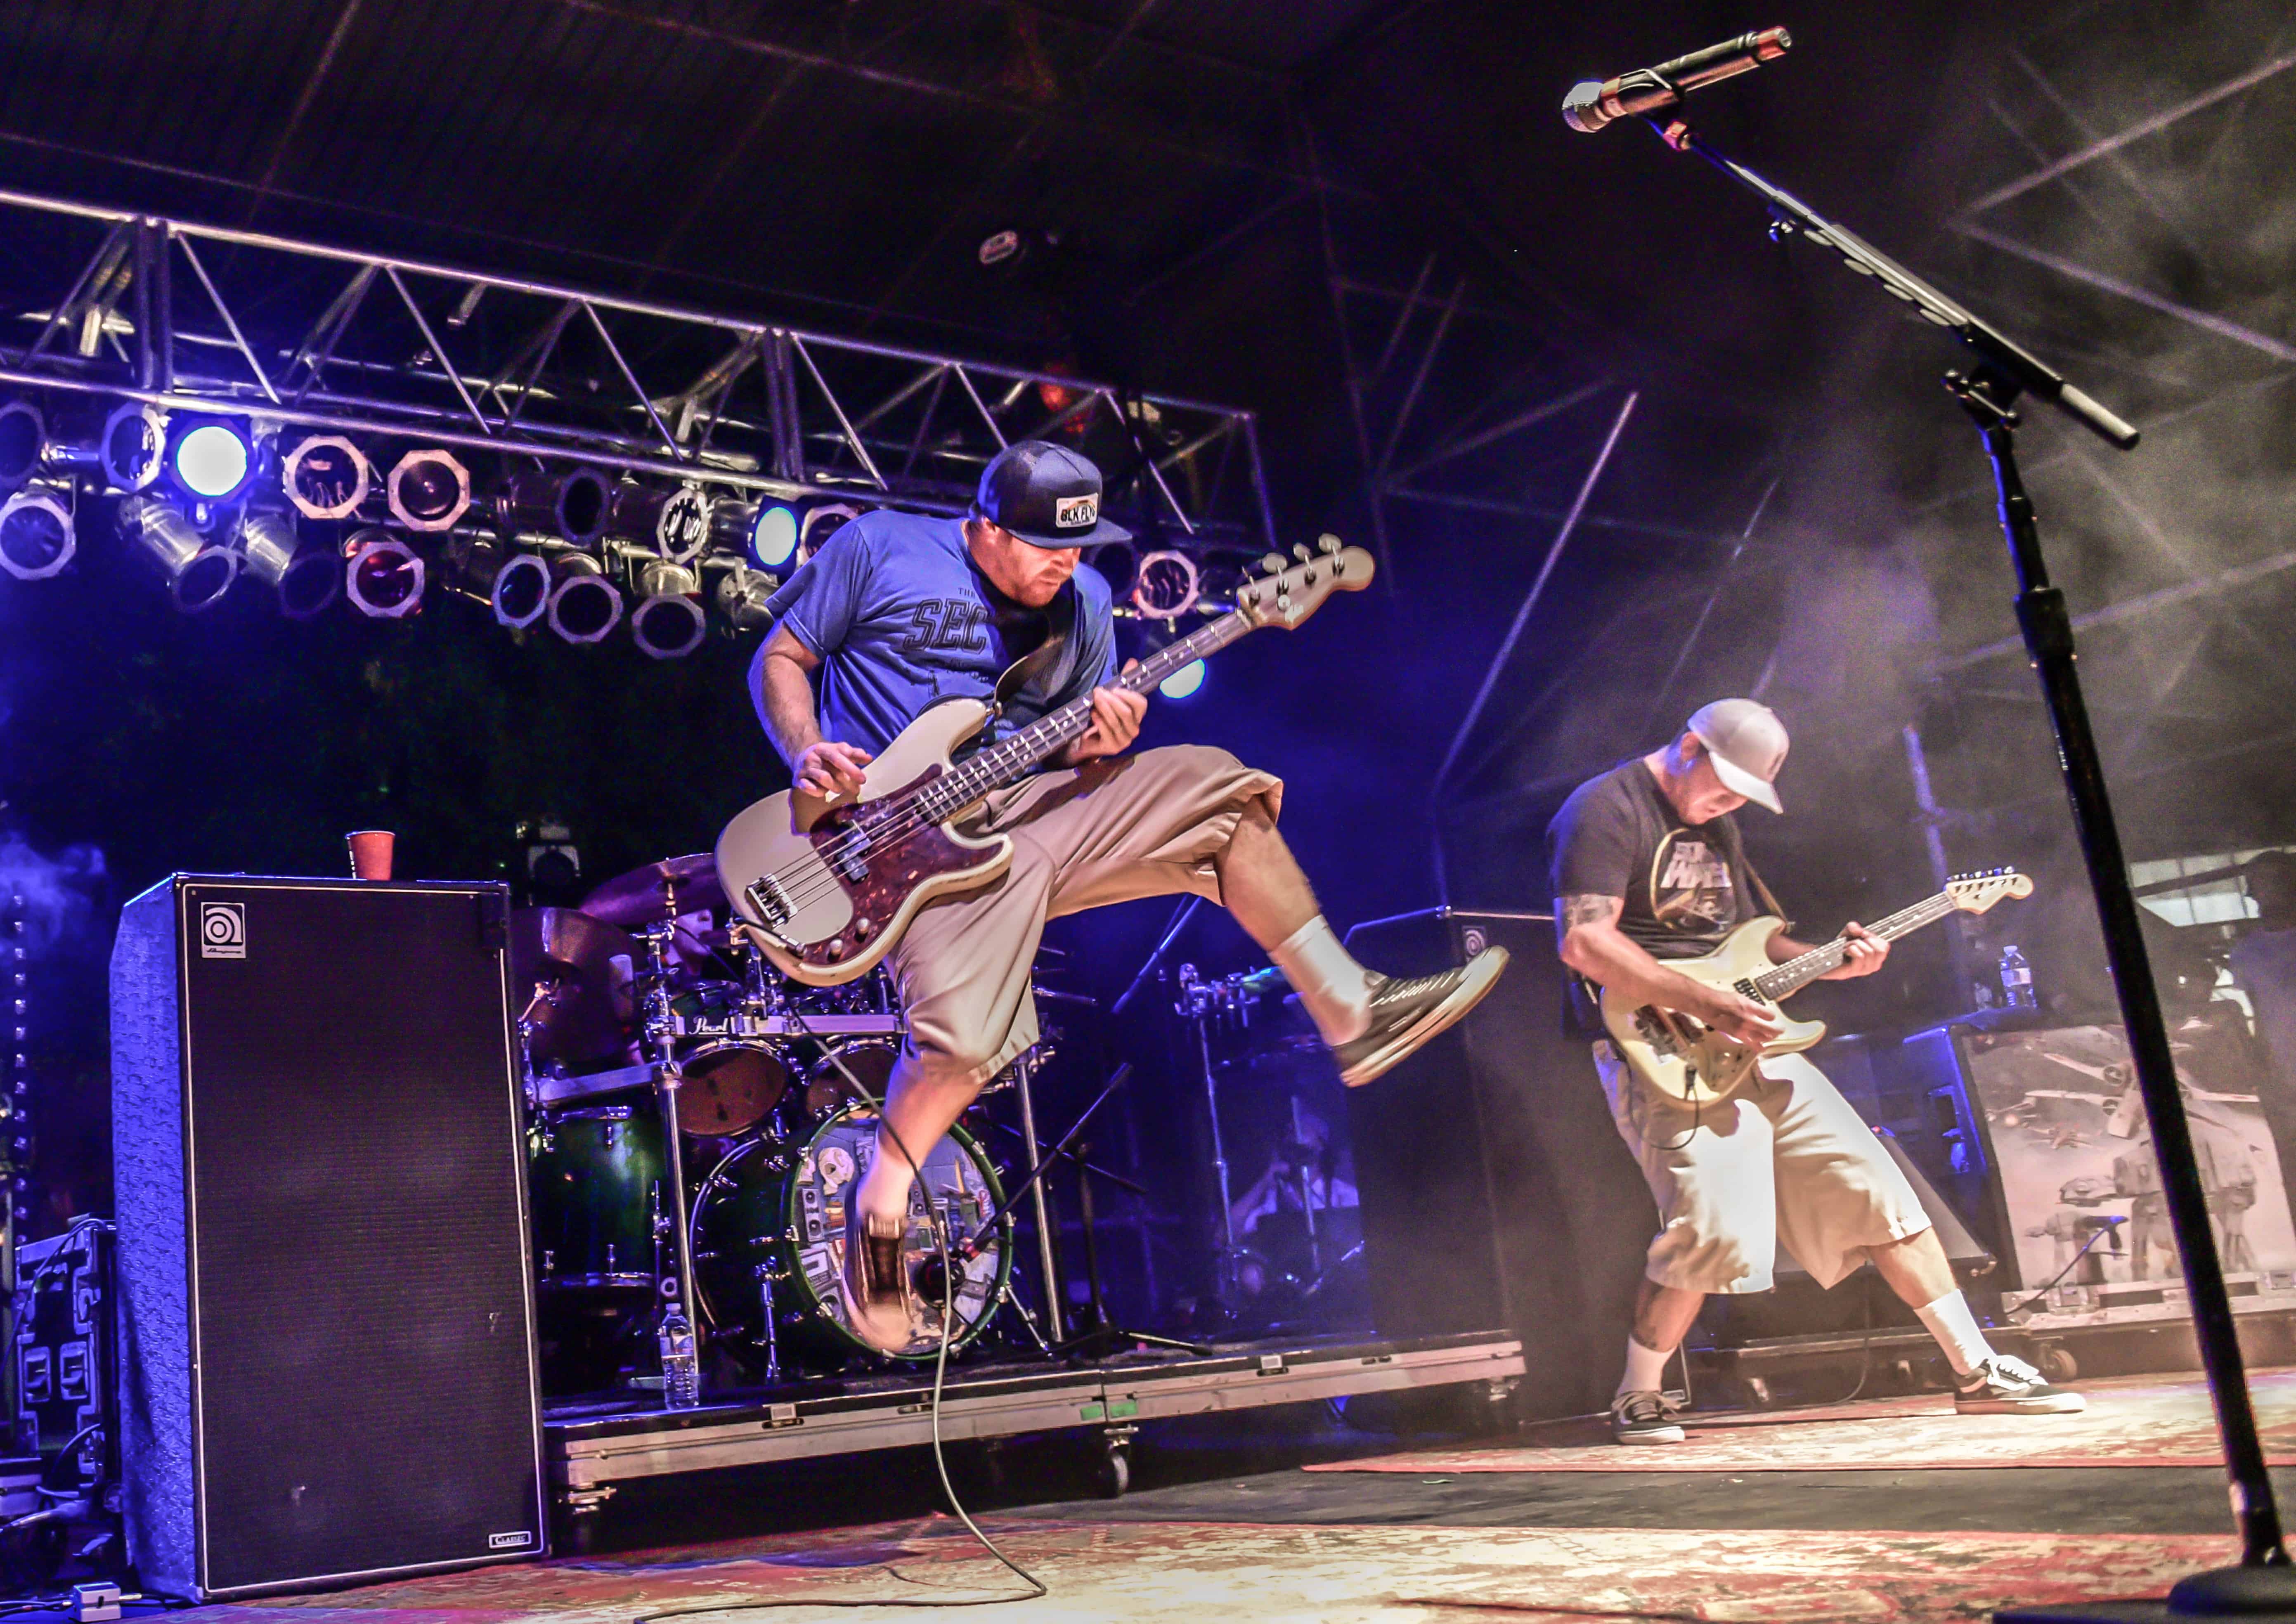 Slightly Stoopid raises more than 20,000 for charity / Sounds of